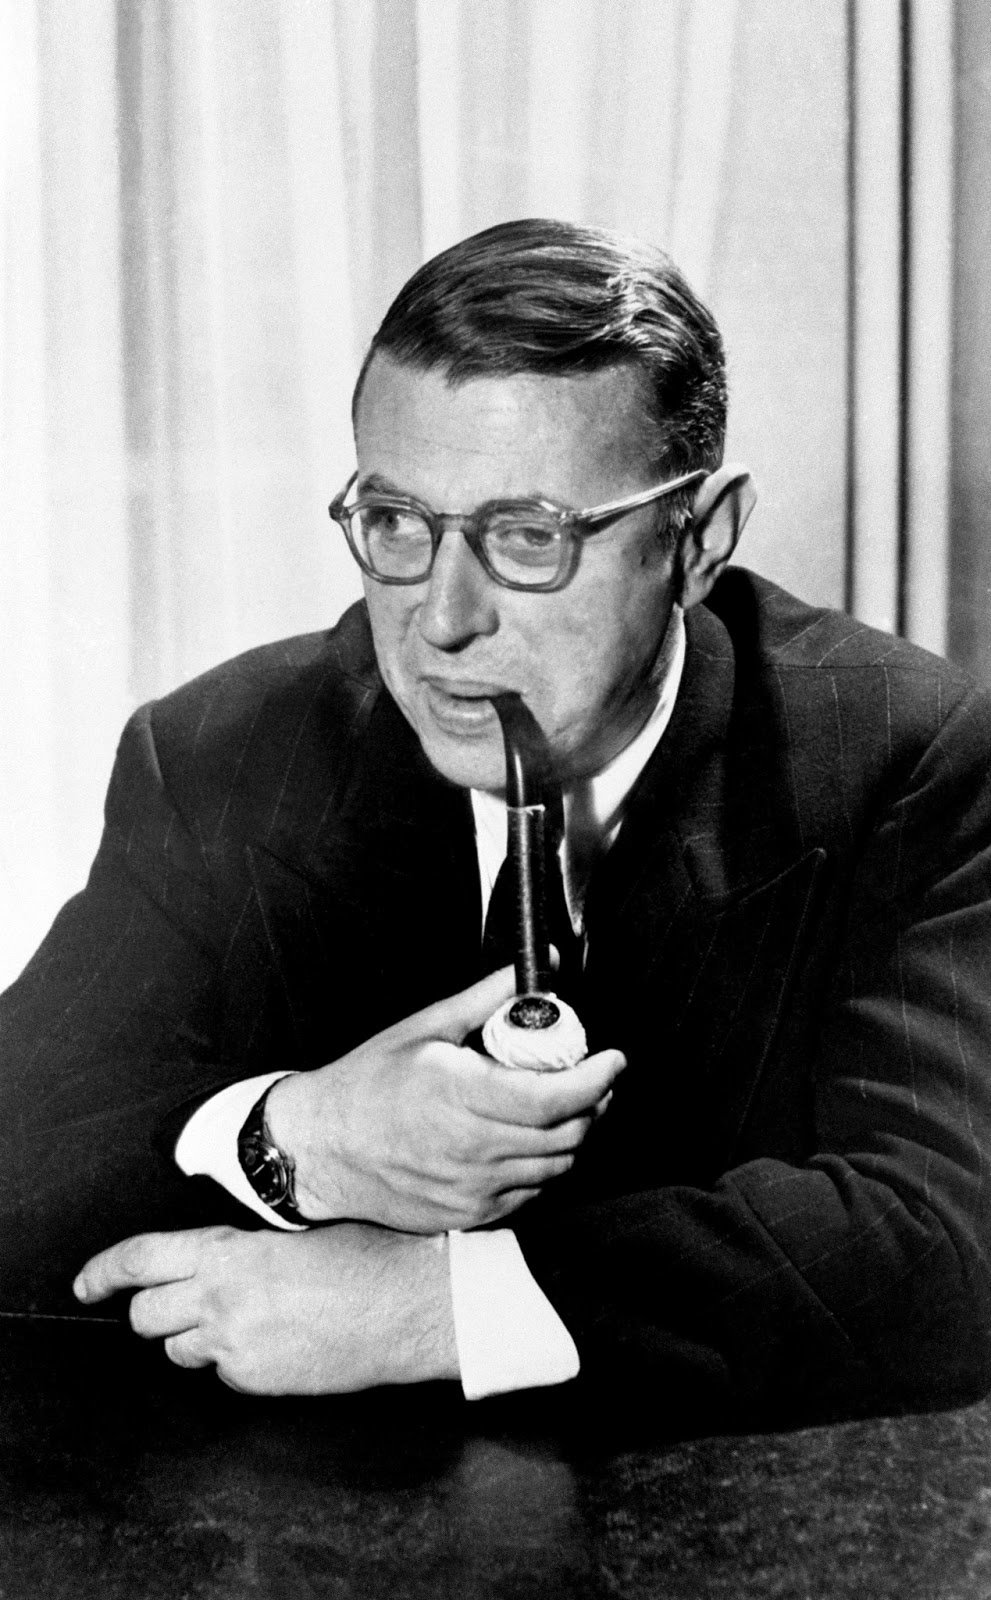 Who was Jean-Paul Sartre